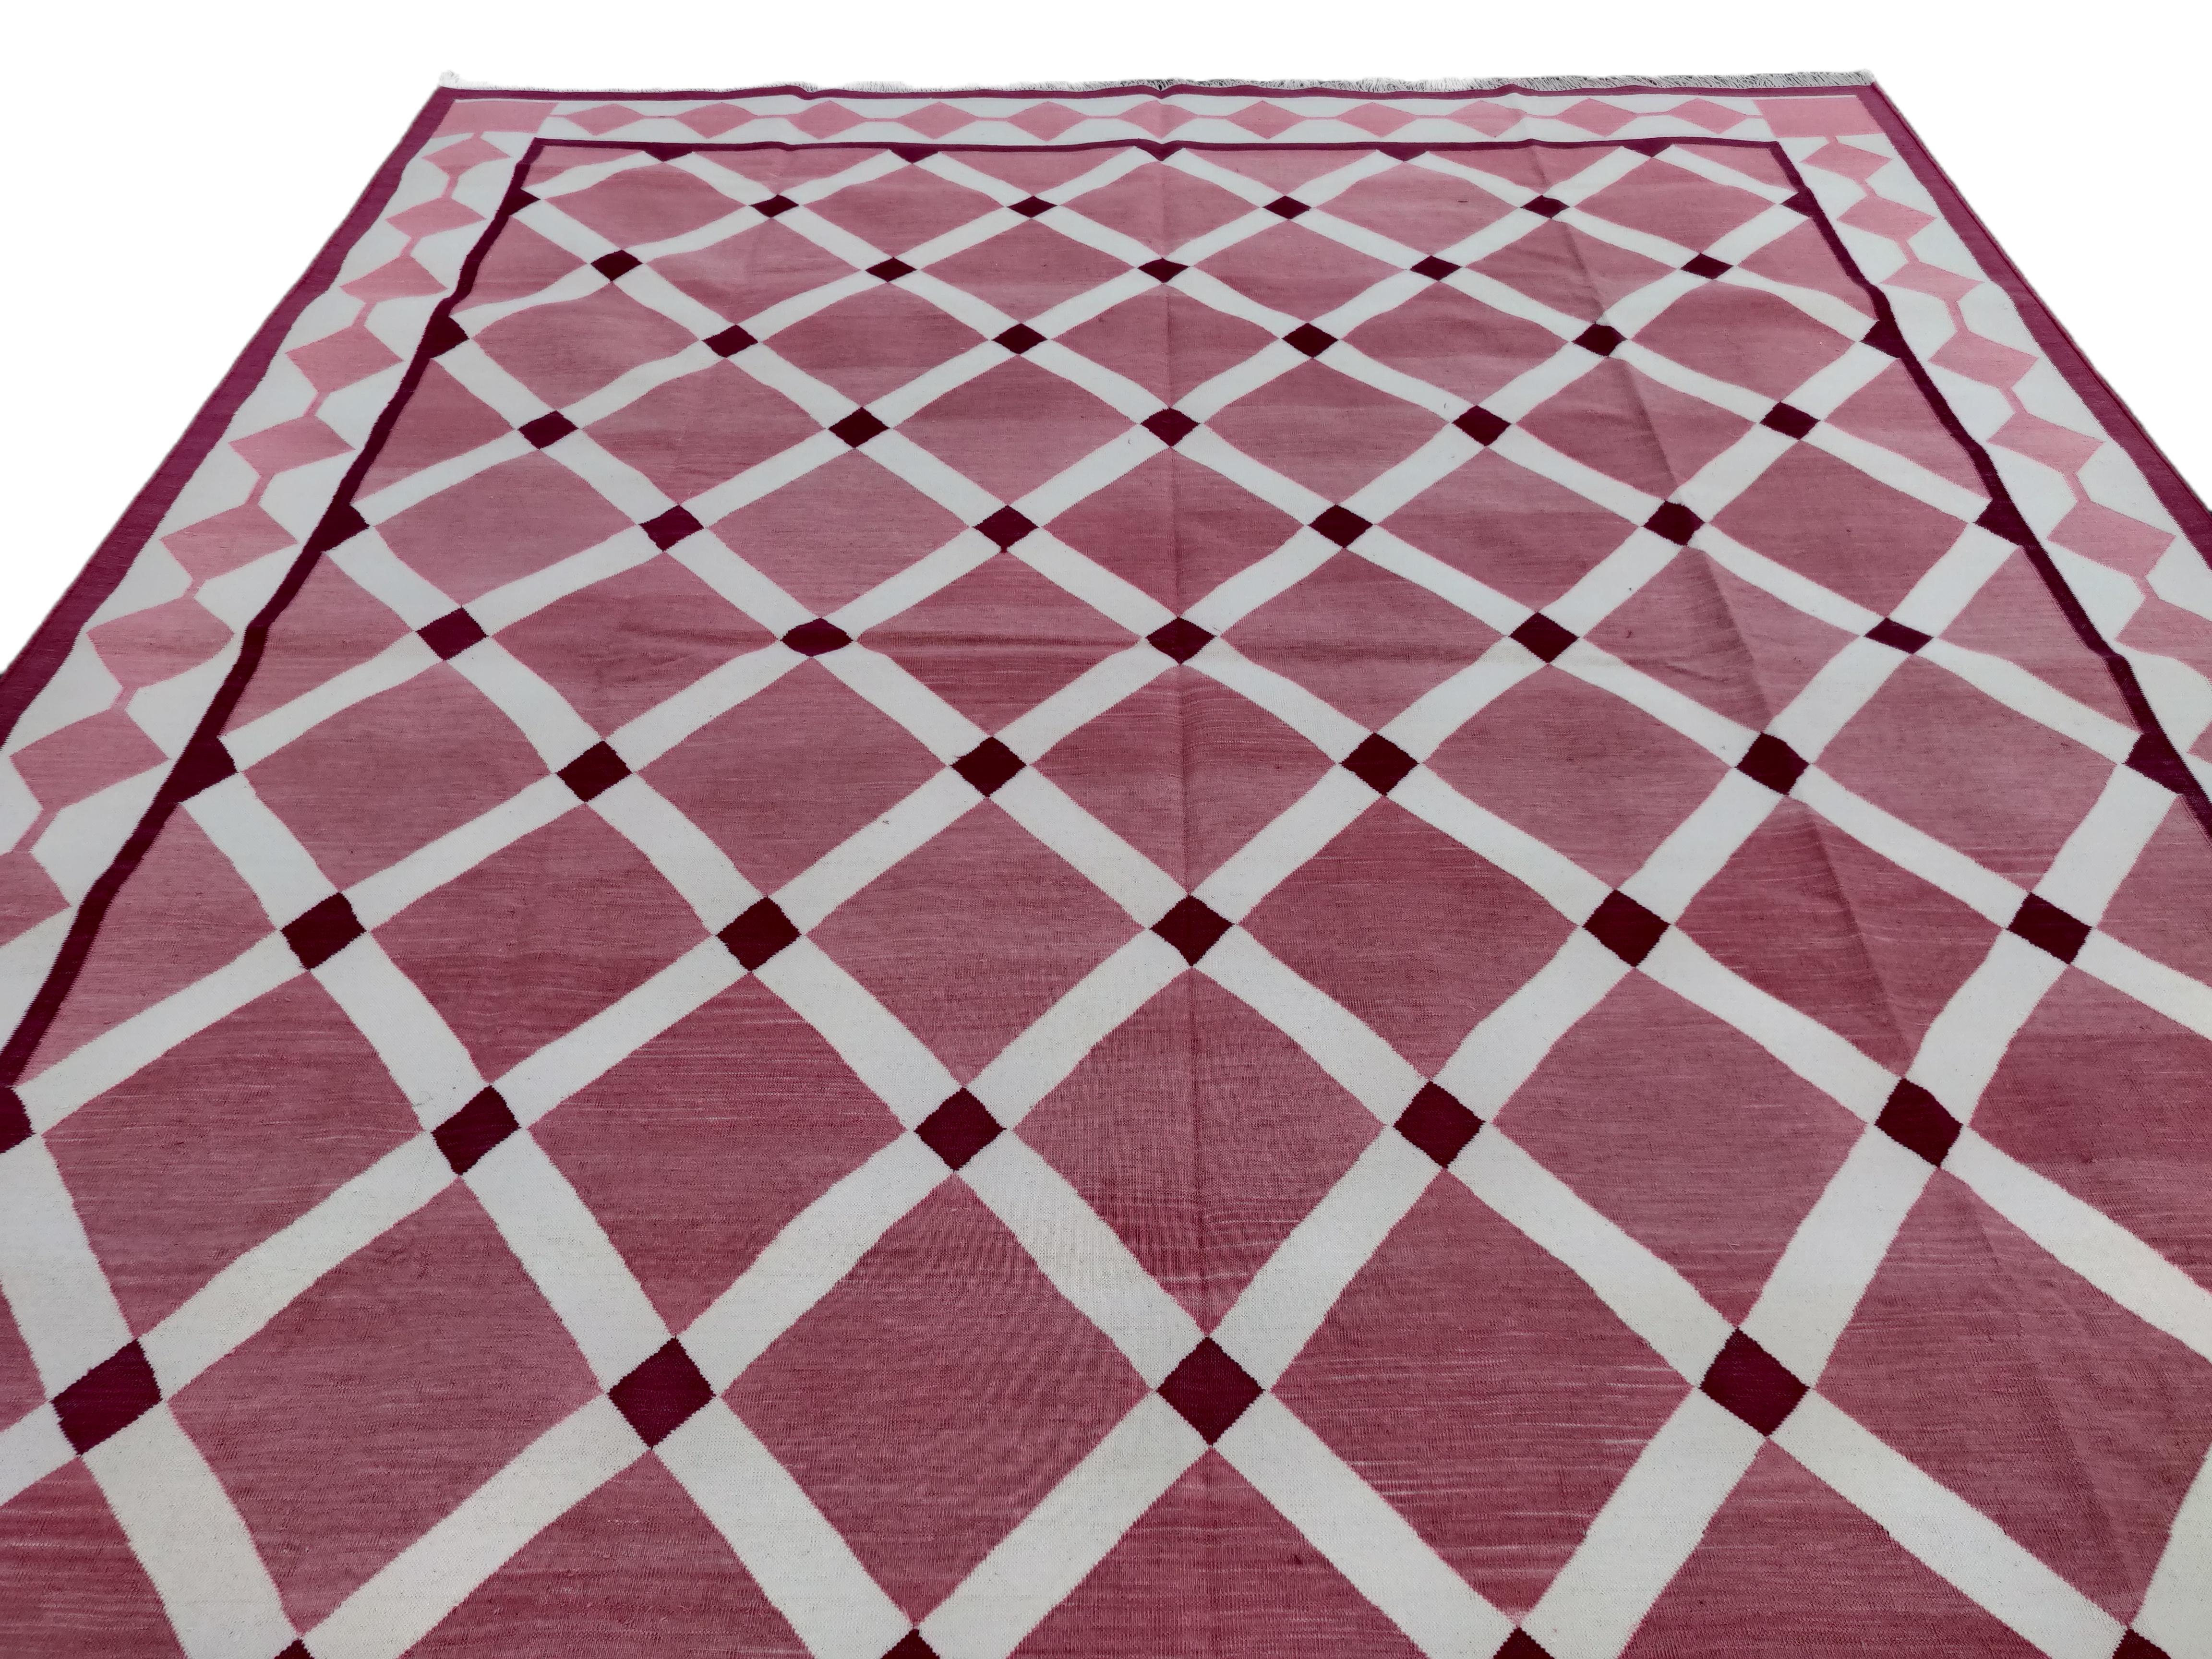 Handmade Cotton Area Flat Weave Rug, 8x10 Pink Indian Star Geometric Dhurrie Rug For Sale 1